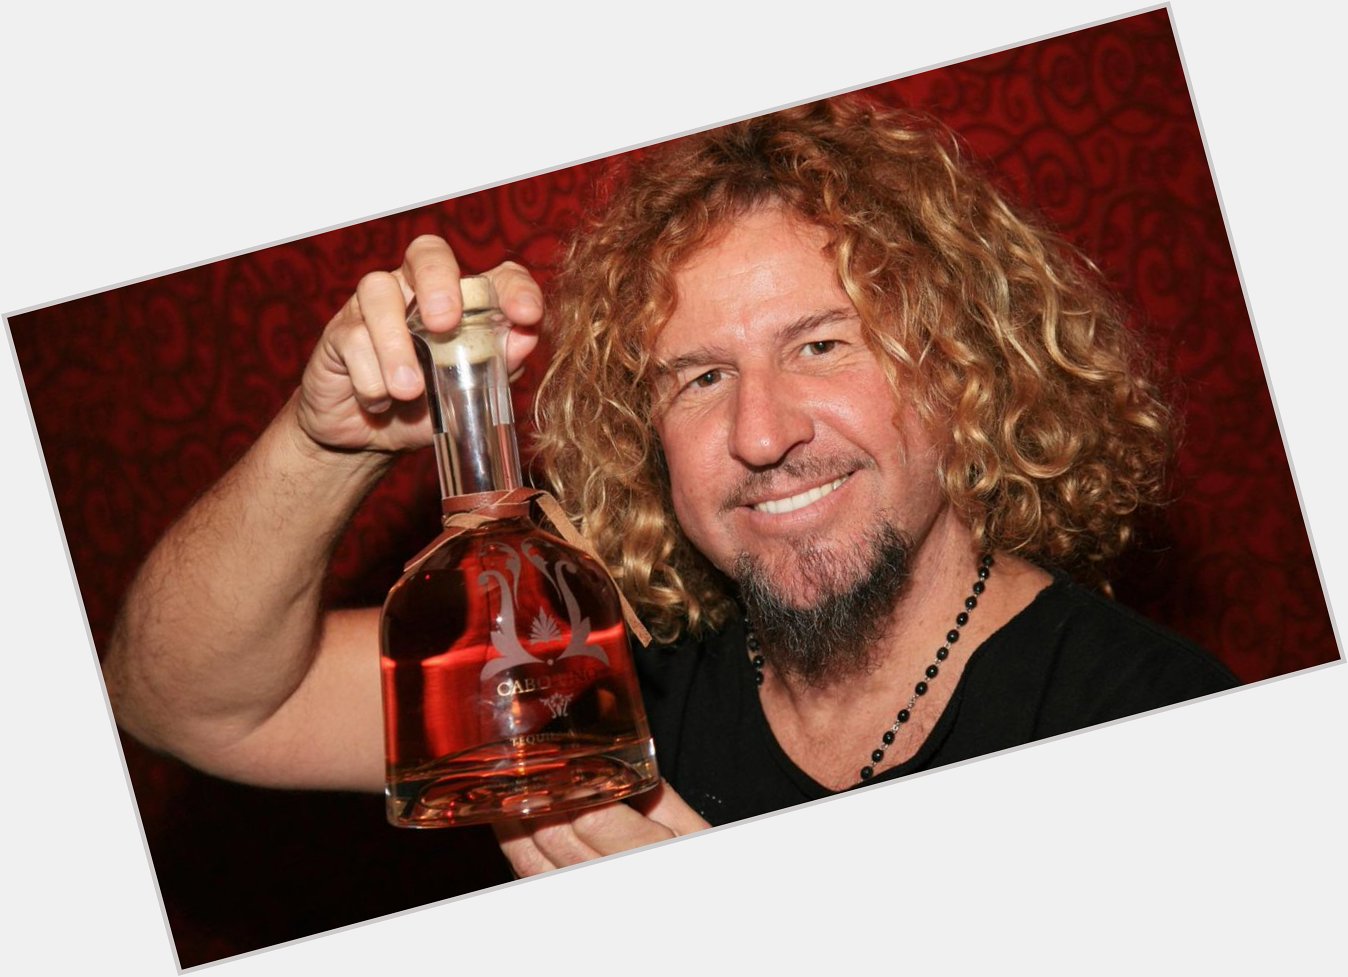 Happy Birthday to the life of the party!!! Sammy Hagar turns a young 68 today! Hope it s a great one Sam! 